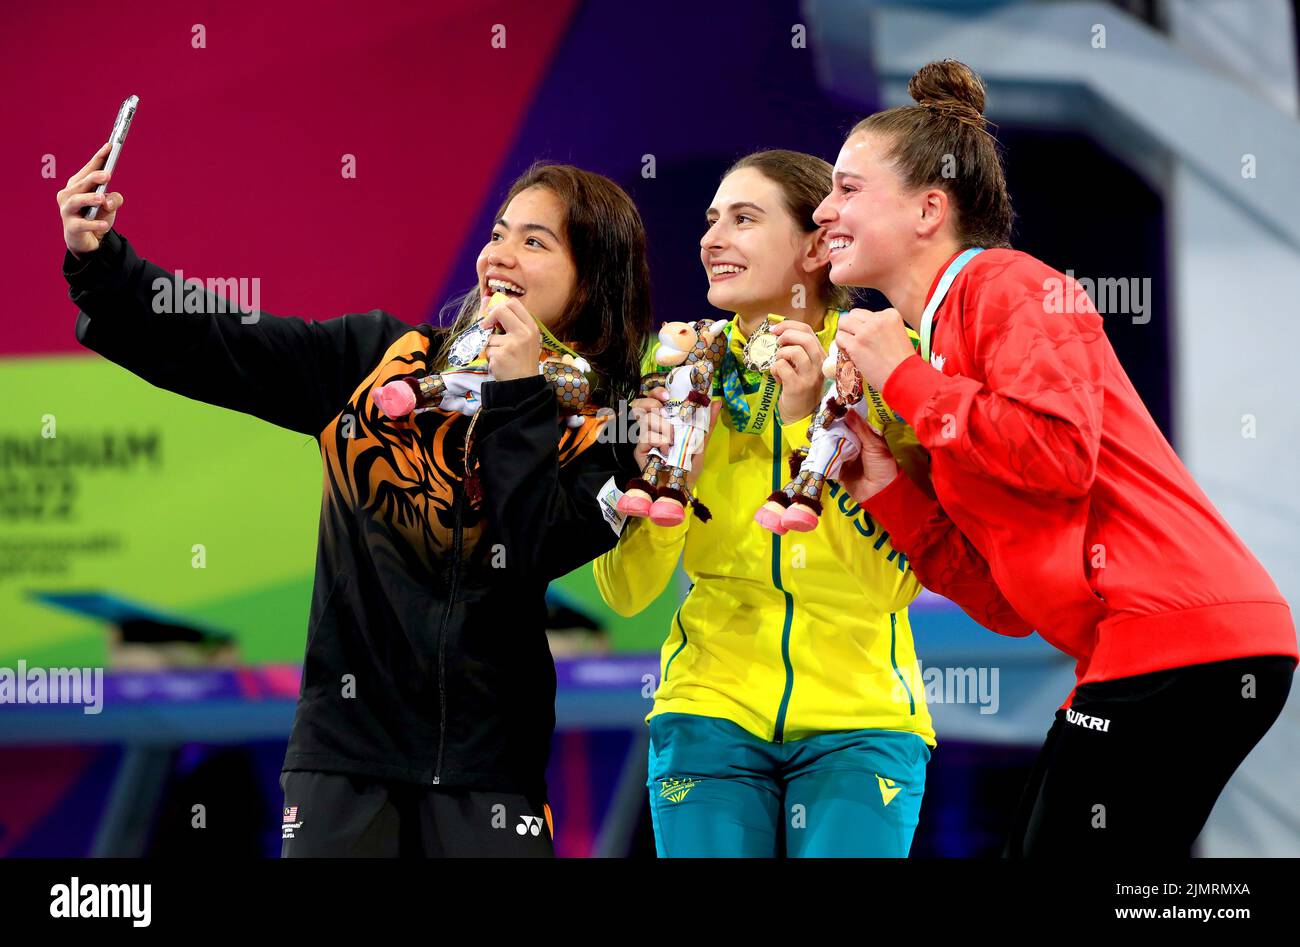 Australia's Maddison Keeney (centre), Malaysia's Nur Dhabitah Binti Sabri (left) and Canada's Mia Jolie Doucet Vallee take a photo together during the medal presentation of the Women's 3m Springboard Diving Final at Sandwell Aquatics Centre on day ten of the 2022 Commonwealth Games in Birmingham. Picture date: Sunday August 7, 2022. Stock Photo